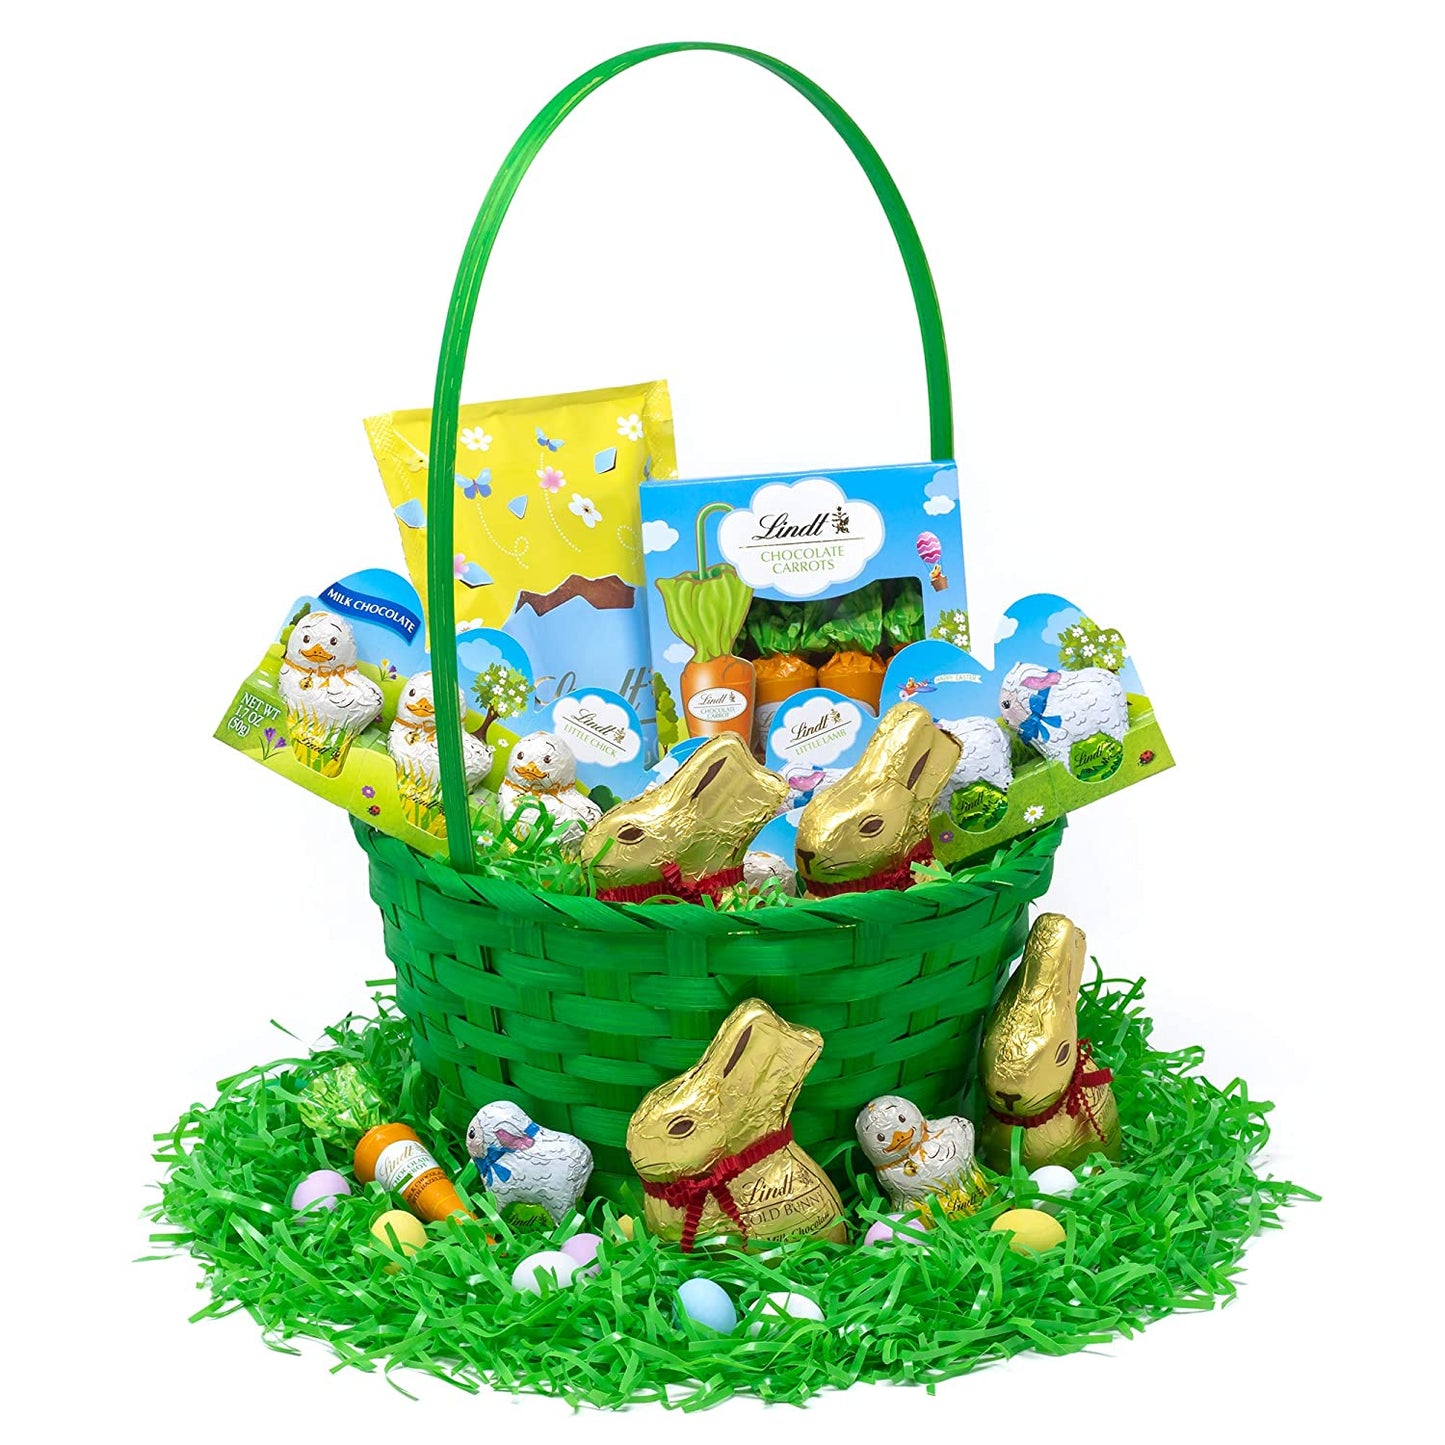 Lindt Easter Basket with GOLD BUNNY, Festive Lindt Chocolate for Kids with Green Easter Basket Ready for Gifting